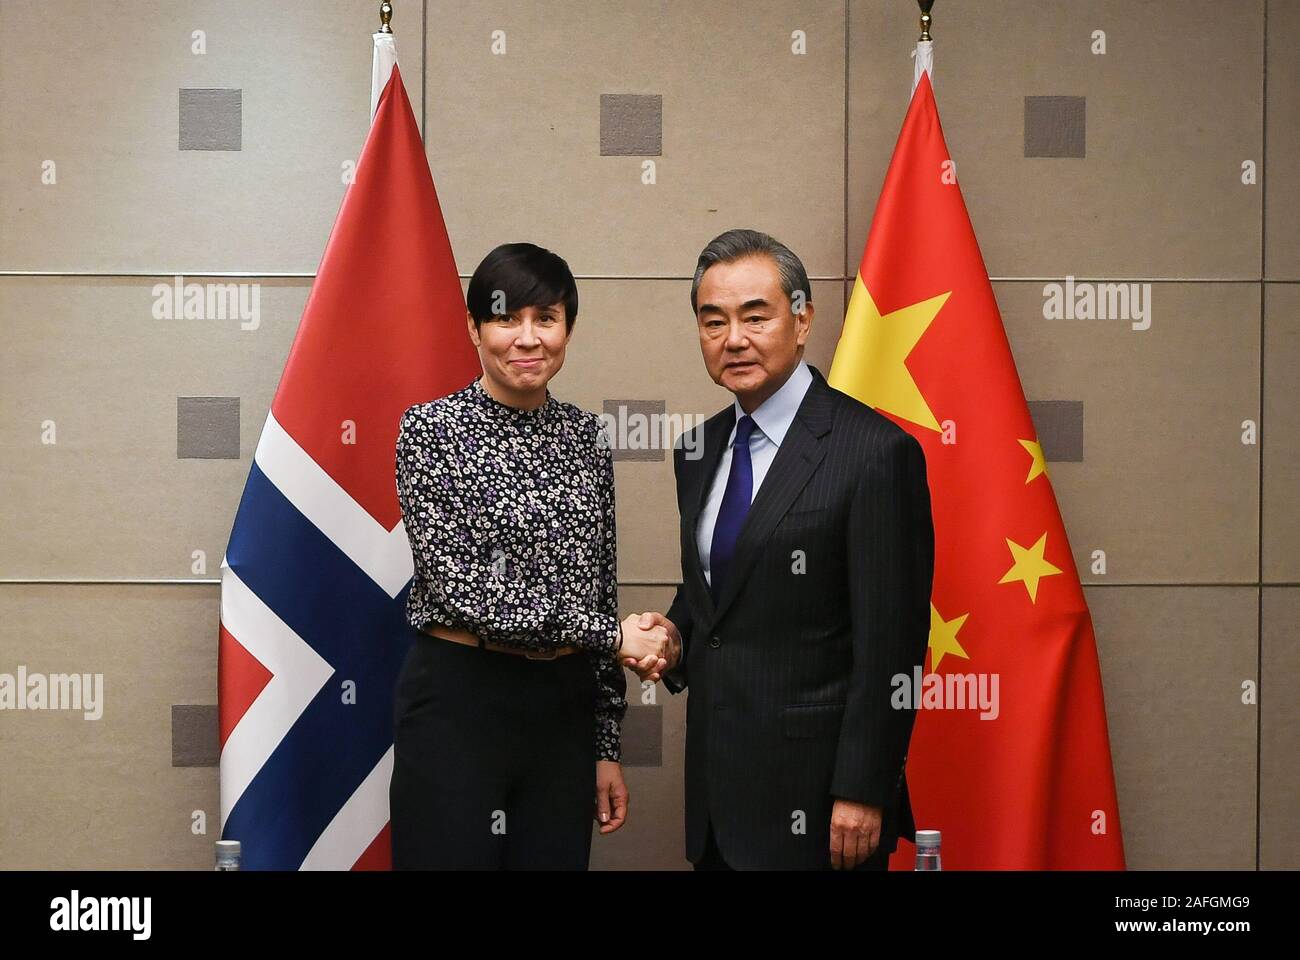 Madrid, Spain. 15th Dec, 2019. Chinese State Councilor and Foreign Minister Wang Yi (R) meets with Norwegian Foreign Minister Ine Eriksen Soreide on the sidelines of the 14th Foreign Ministers' Meeting of the Asia-Europe Meeting (ASEM) in Madrid, Spain, Dec. 15, 2019. Credit: Lu Yang/Xinhua/Alamy Live News Stock Photo